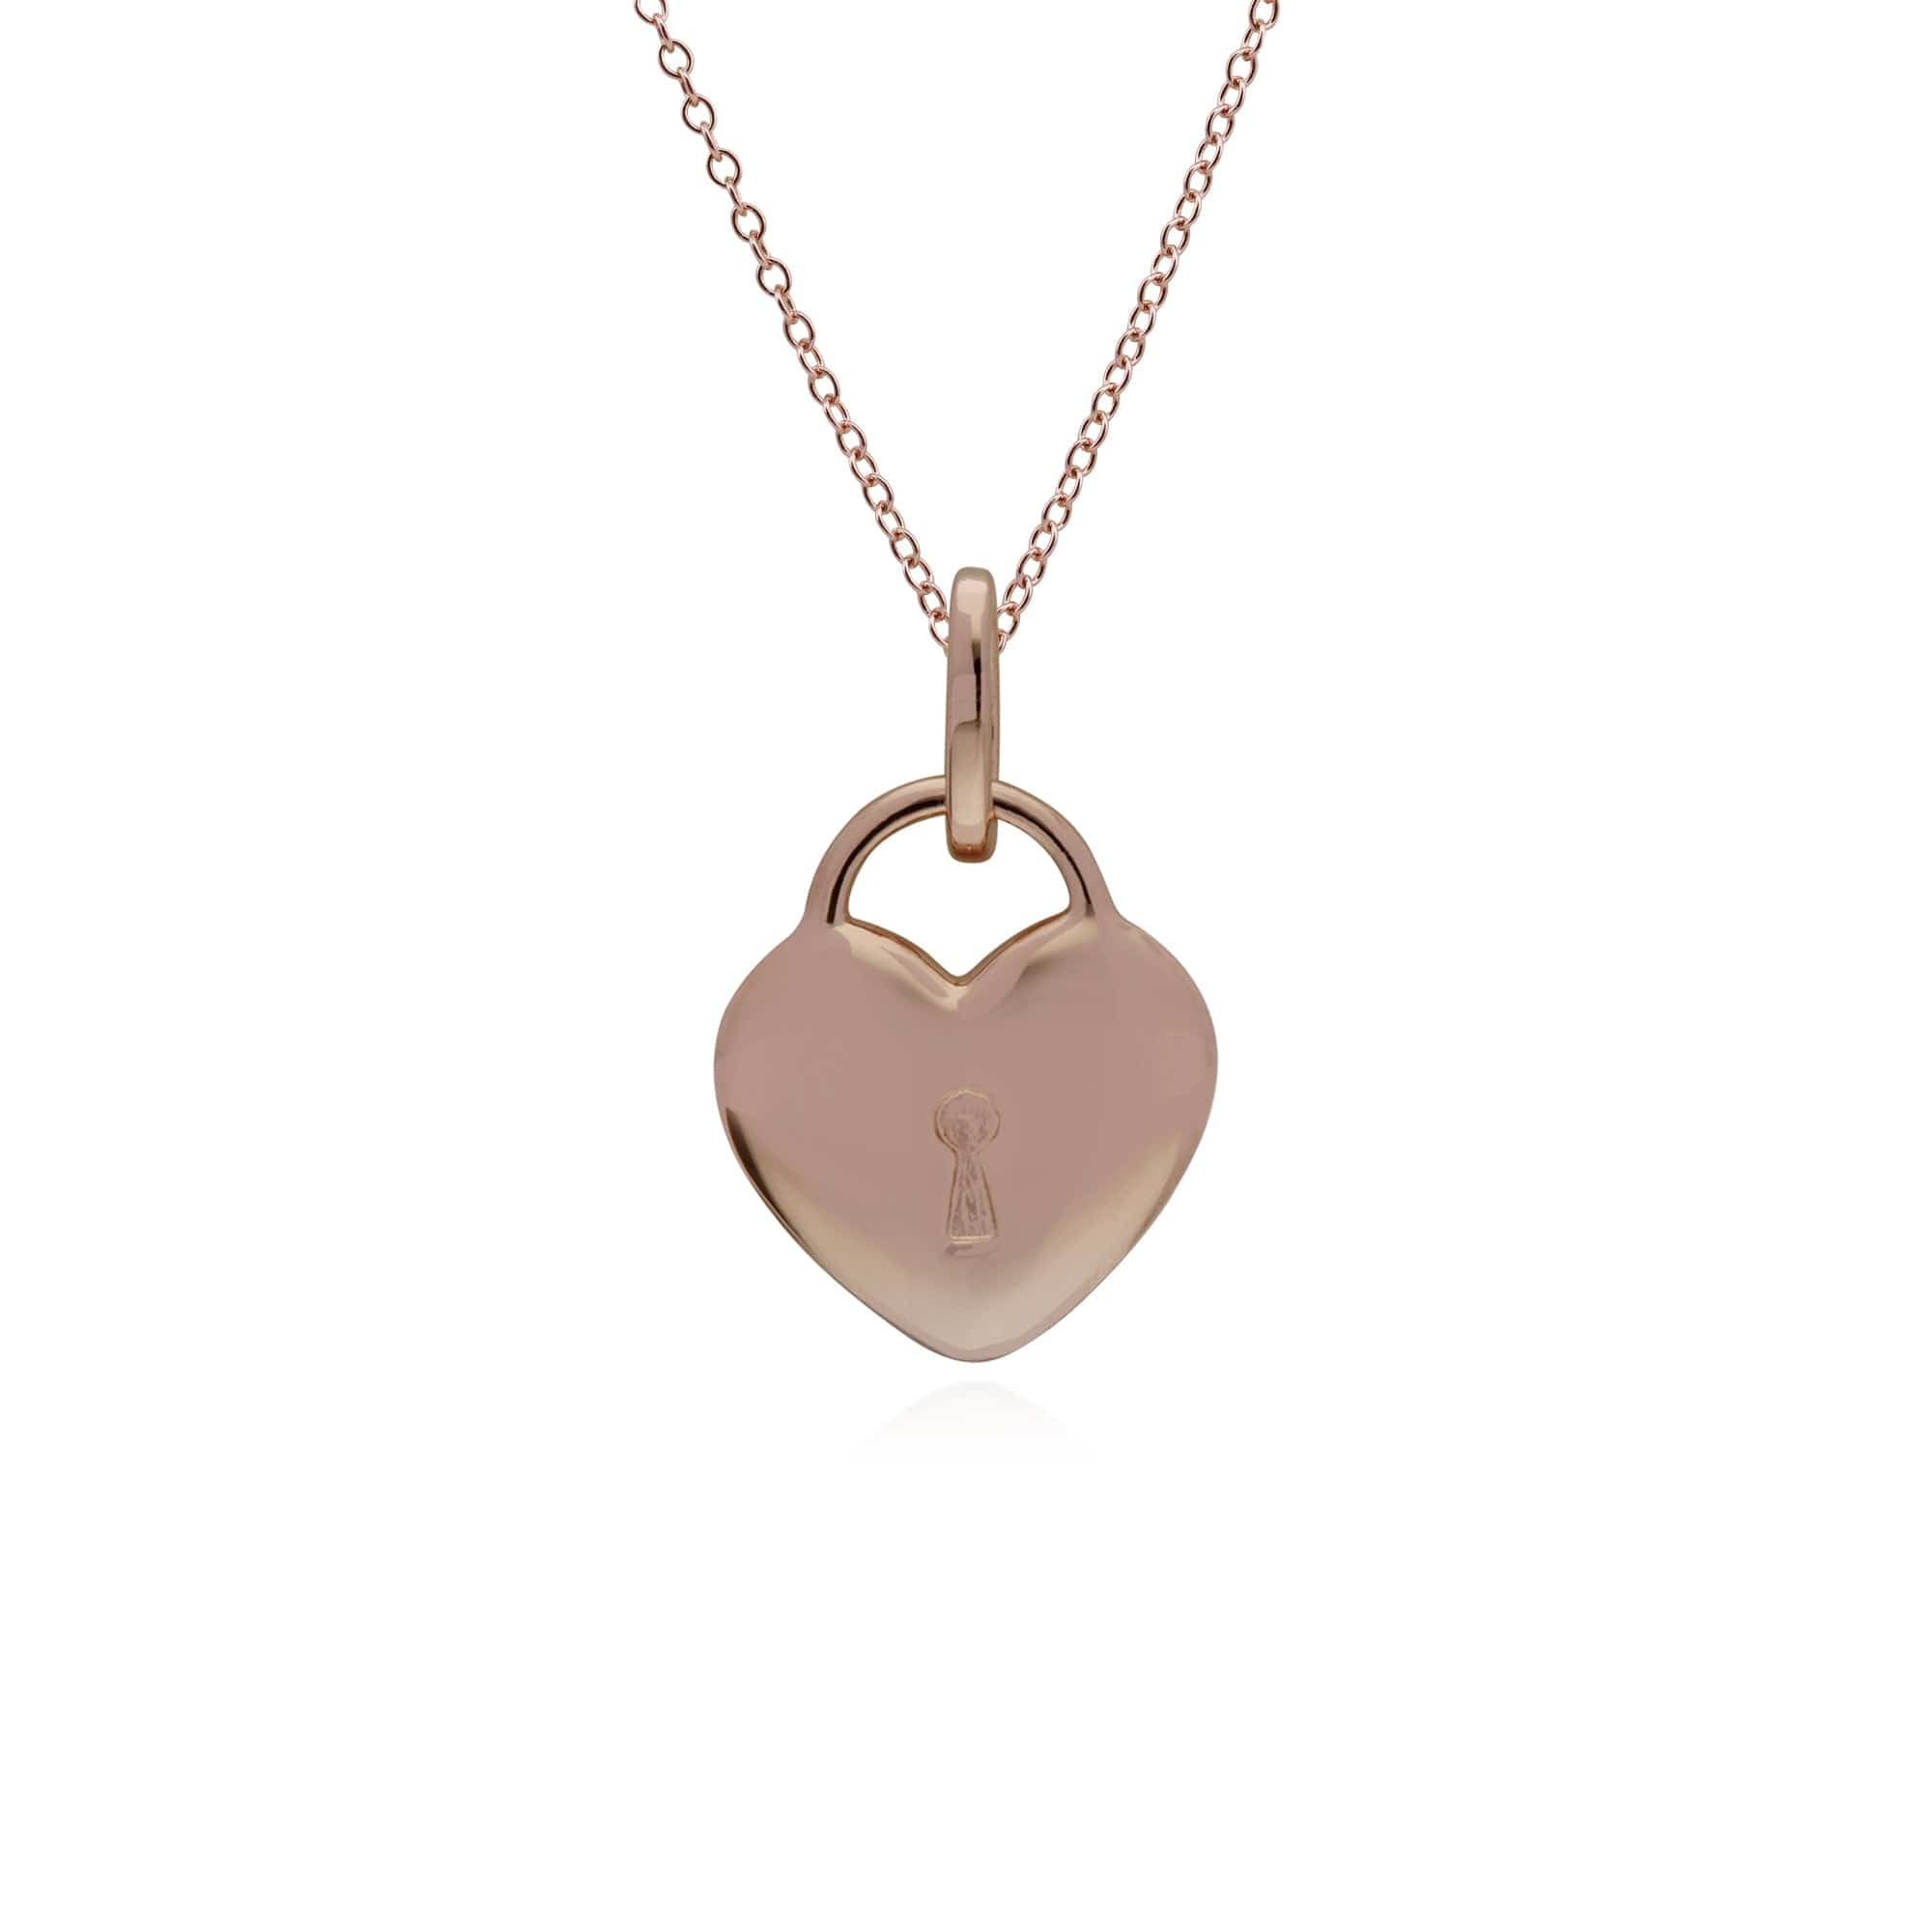 270P027101925-270P026901925 Classic Heart Lock Pendant & Pearl Key Charm in Rose Gold Plated 925 Sterling Silver 3